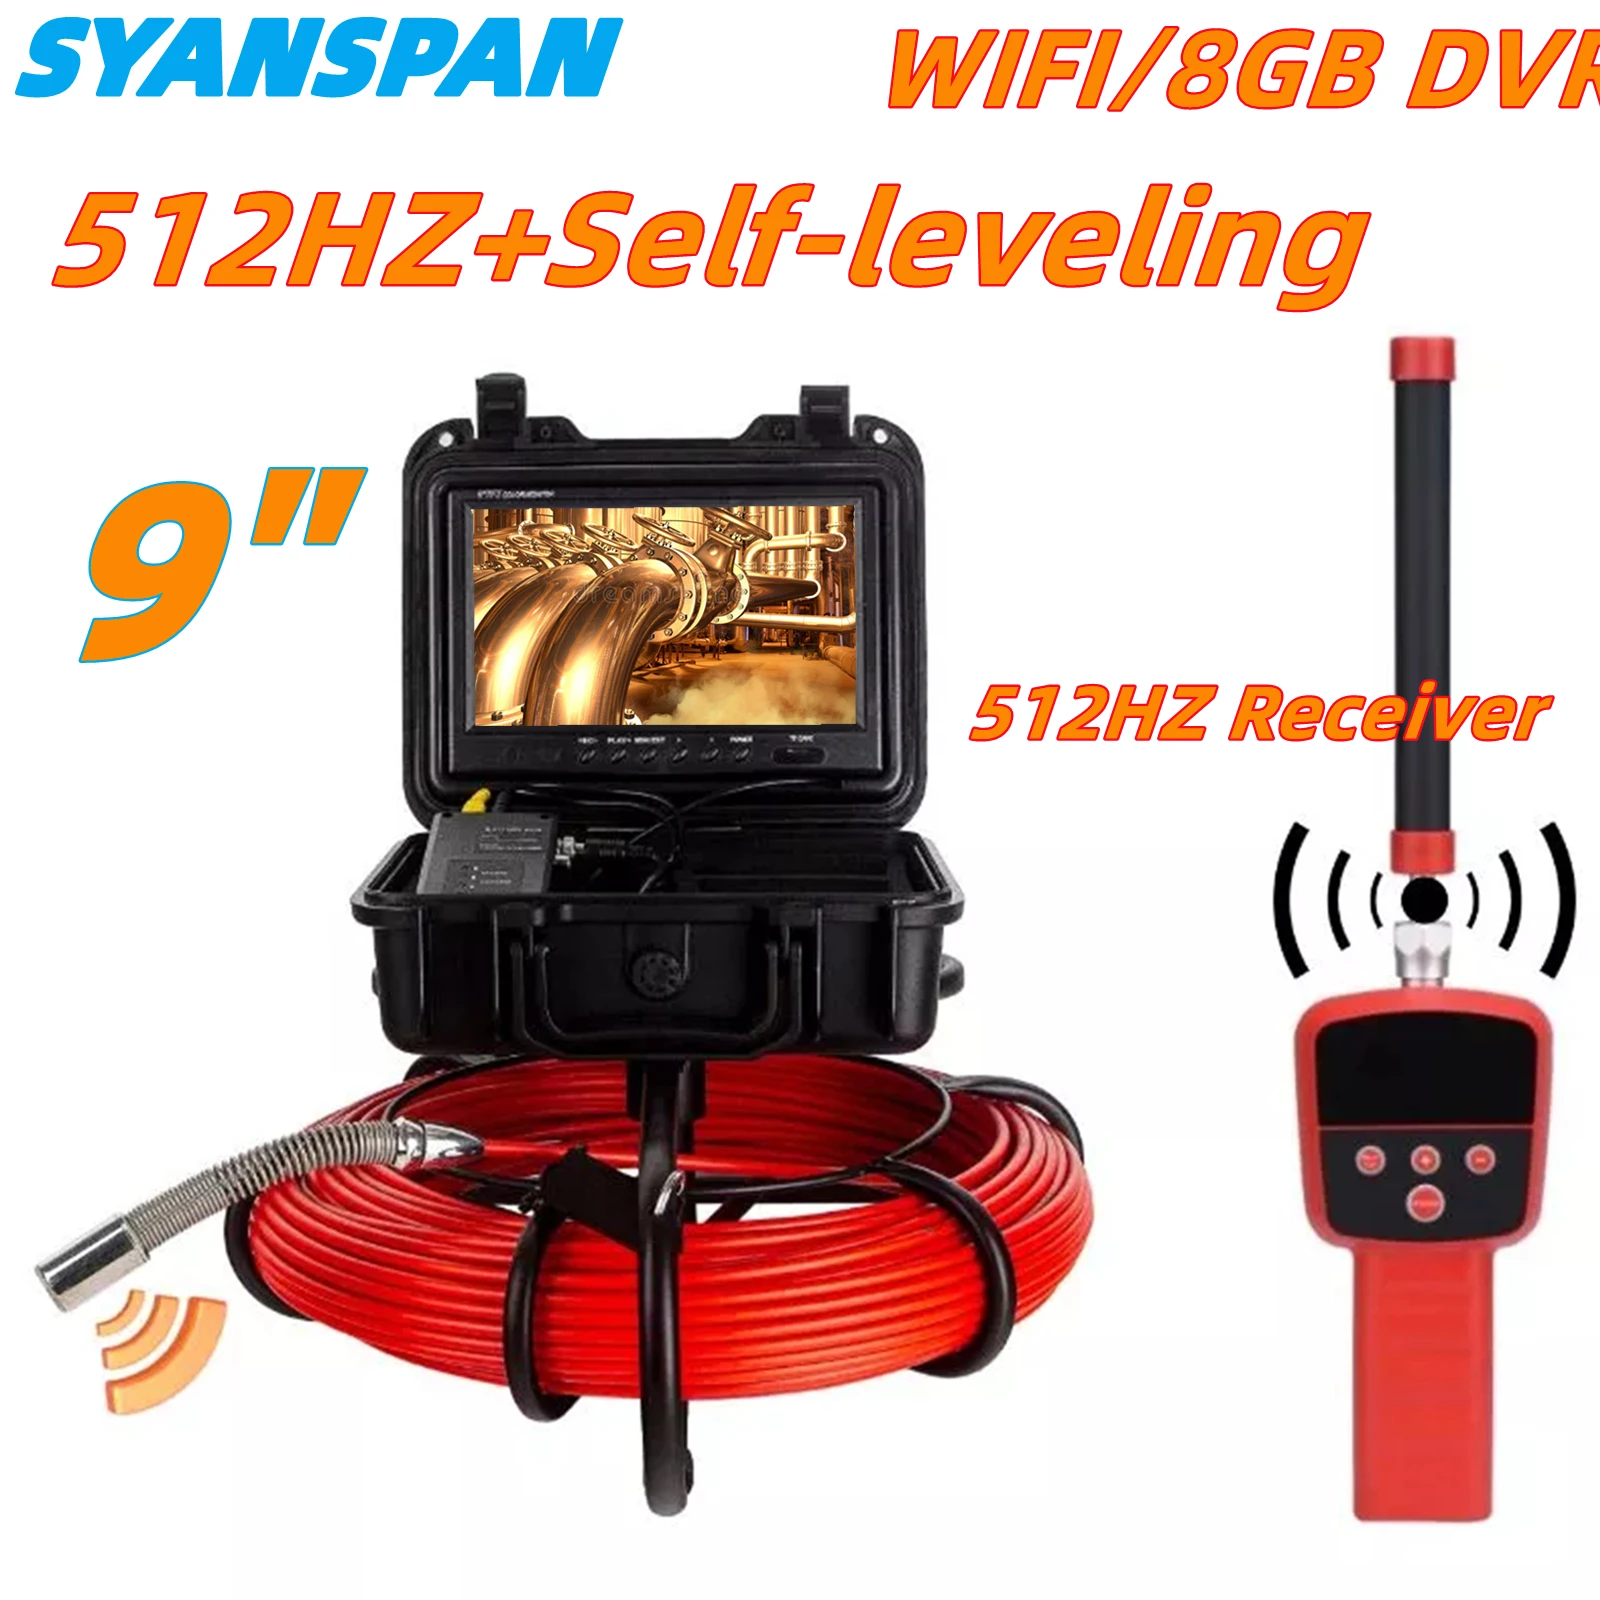 Pipe Inspection Camera 512HZ Self-leveling And 512HZ Receiver  9Inch HD Screen 7MM Cable With WIFI Or 8GB SD Card DVR  Function